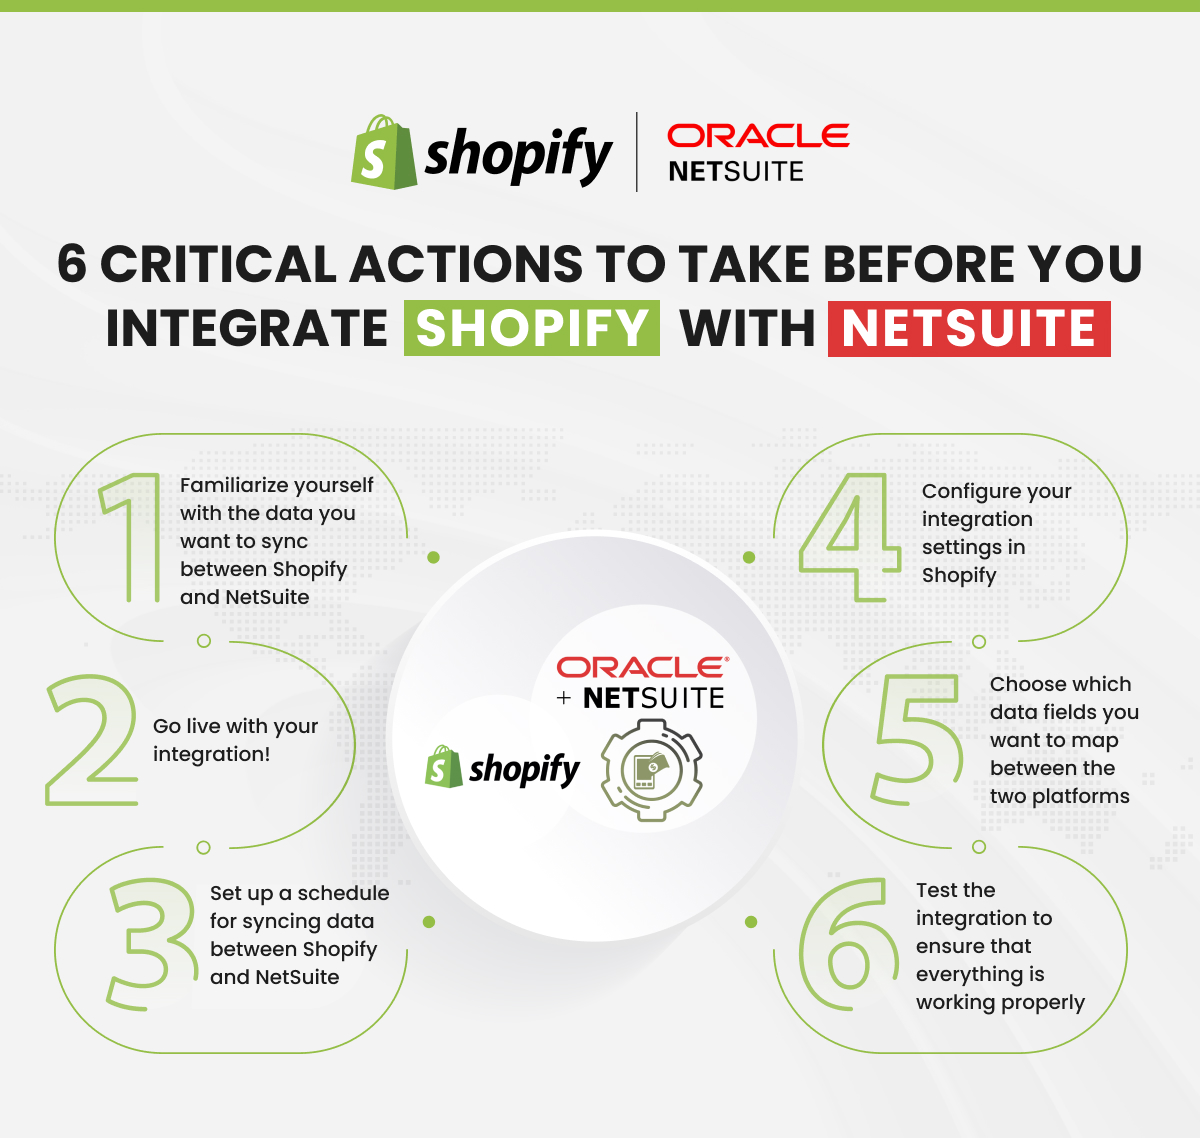 6 Critical Actions to Take Before You Integrate Shopify With NetSuite